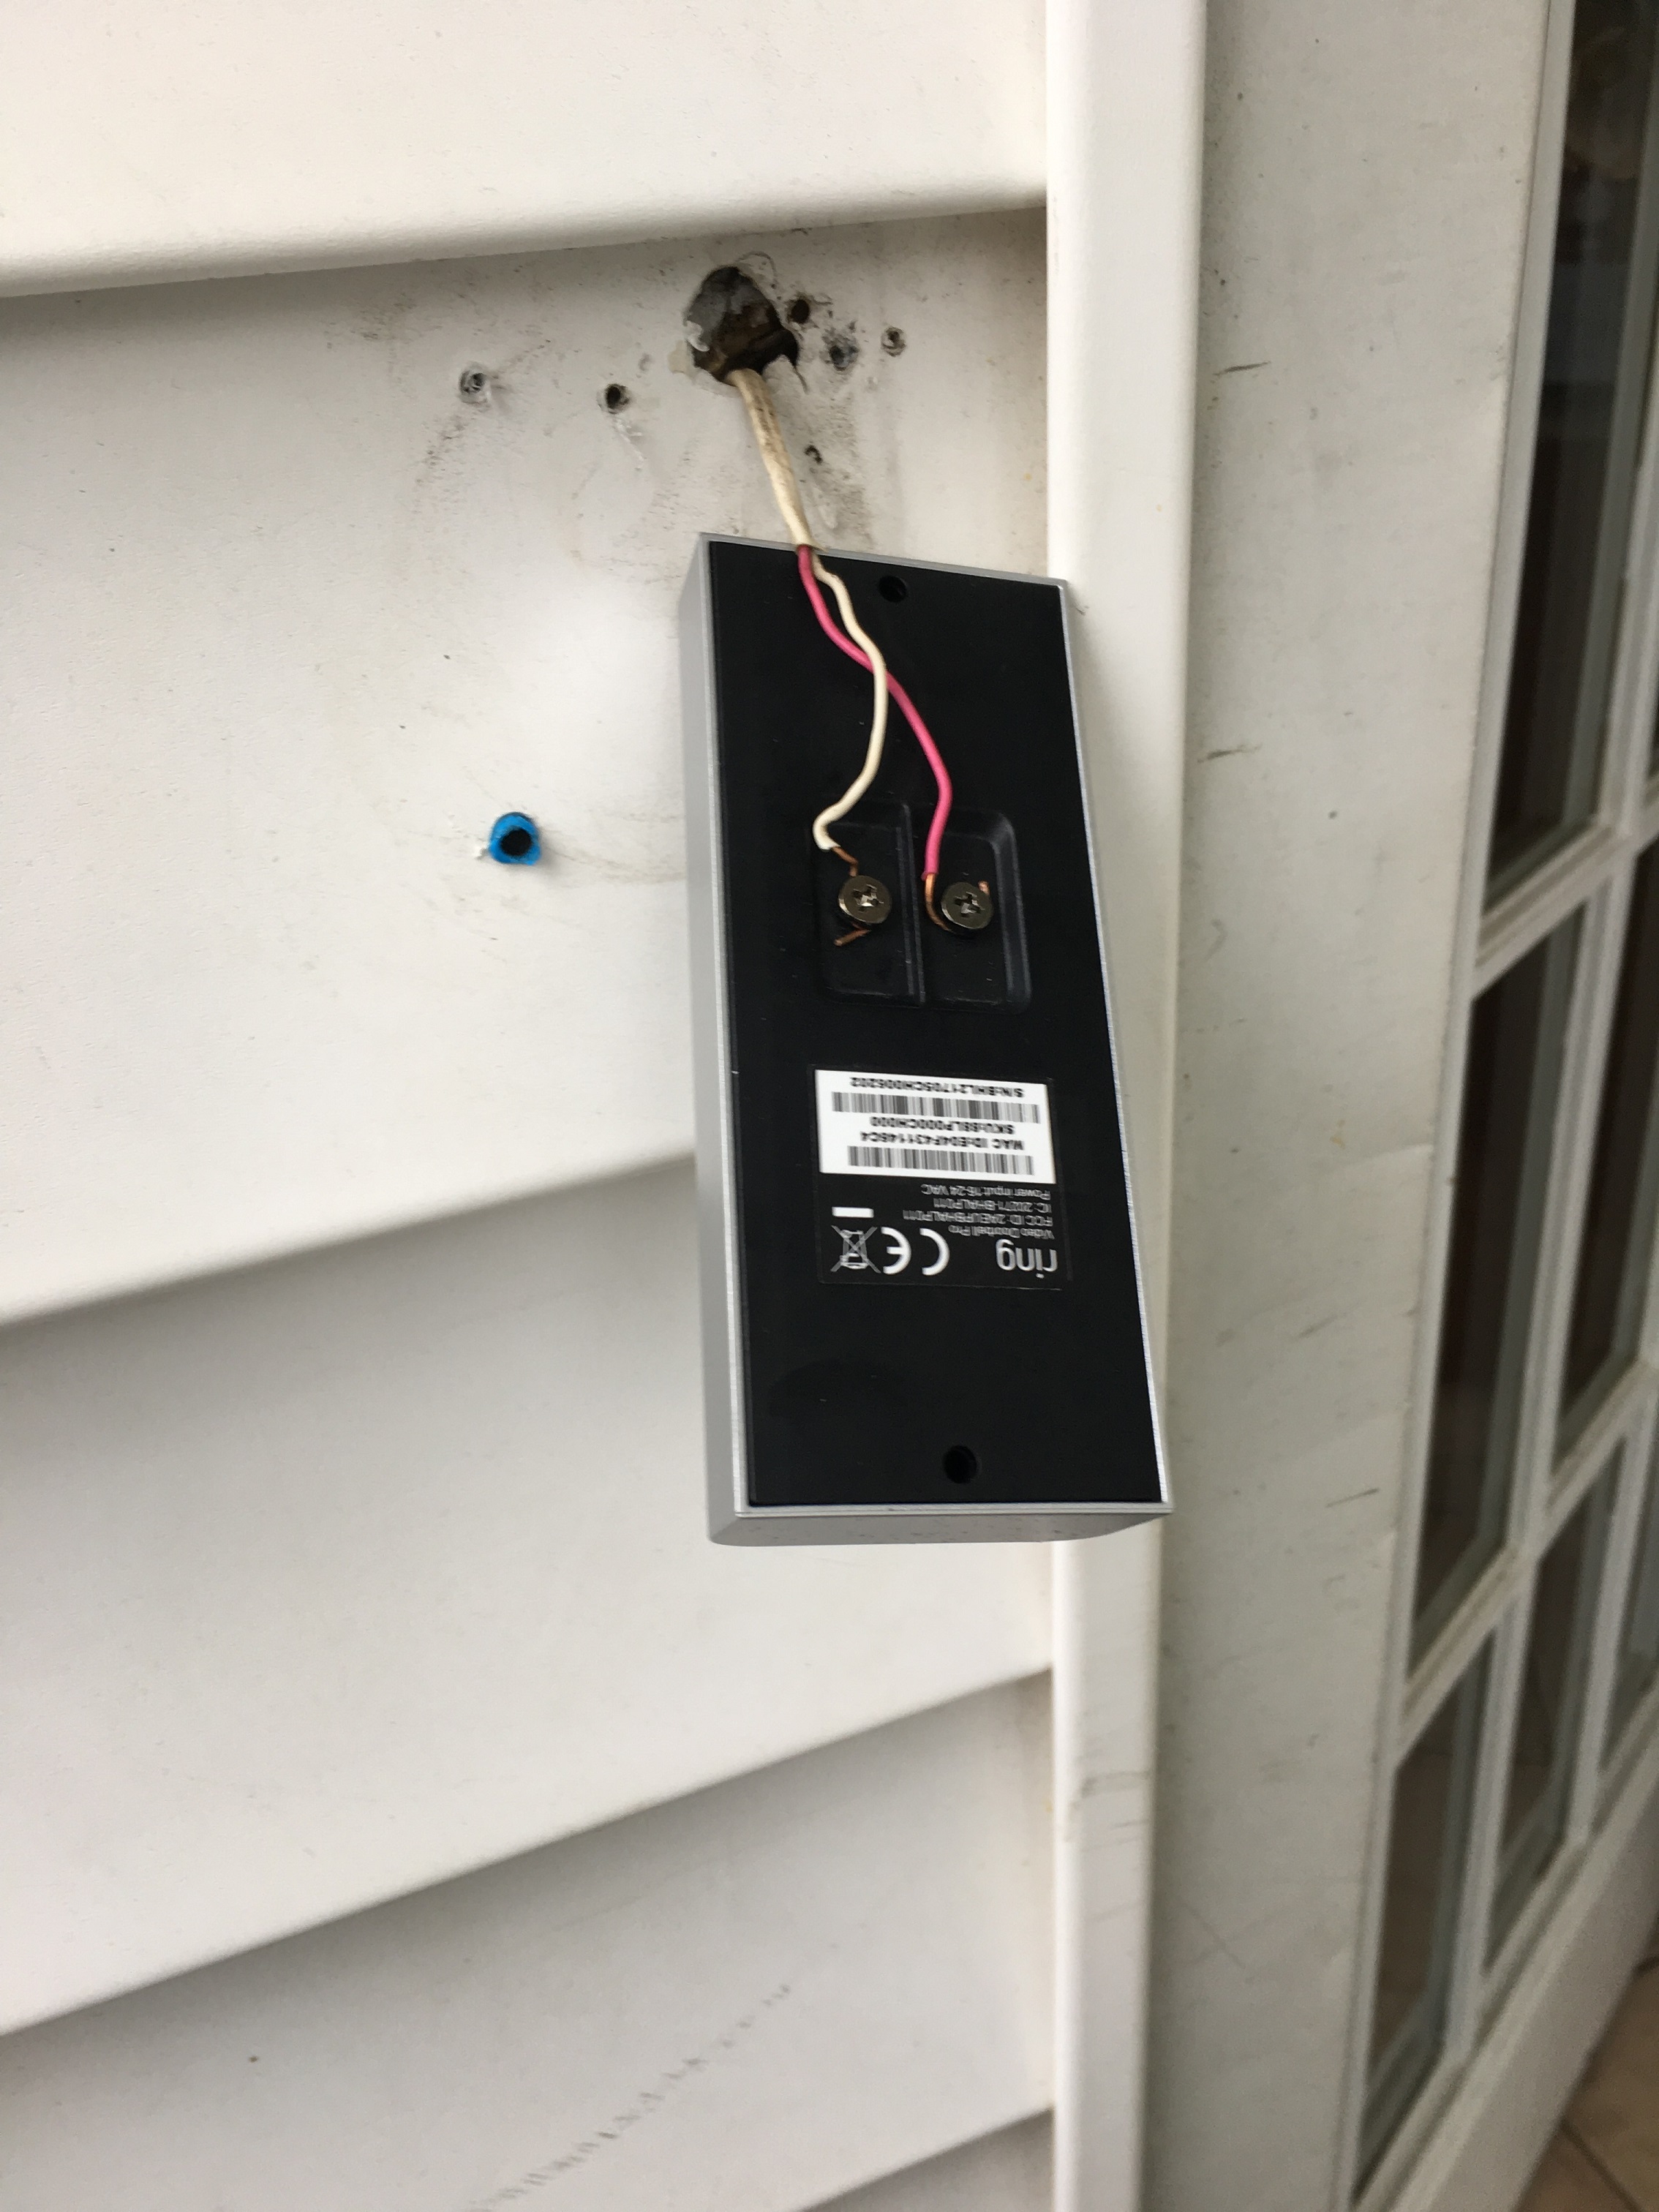 Help!! Was trying to reinforce my ring doorbell camera bracket to the wall.  Black cord came off, not even a clue where to connect it back to.. black  and red cords were